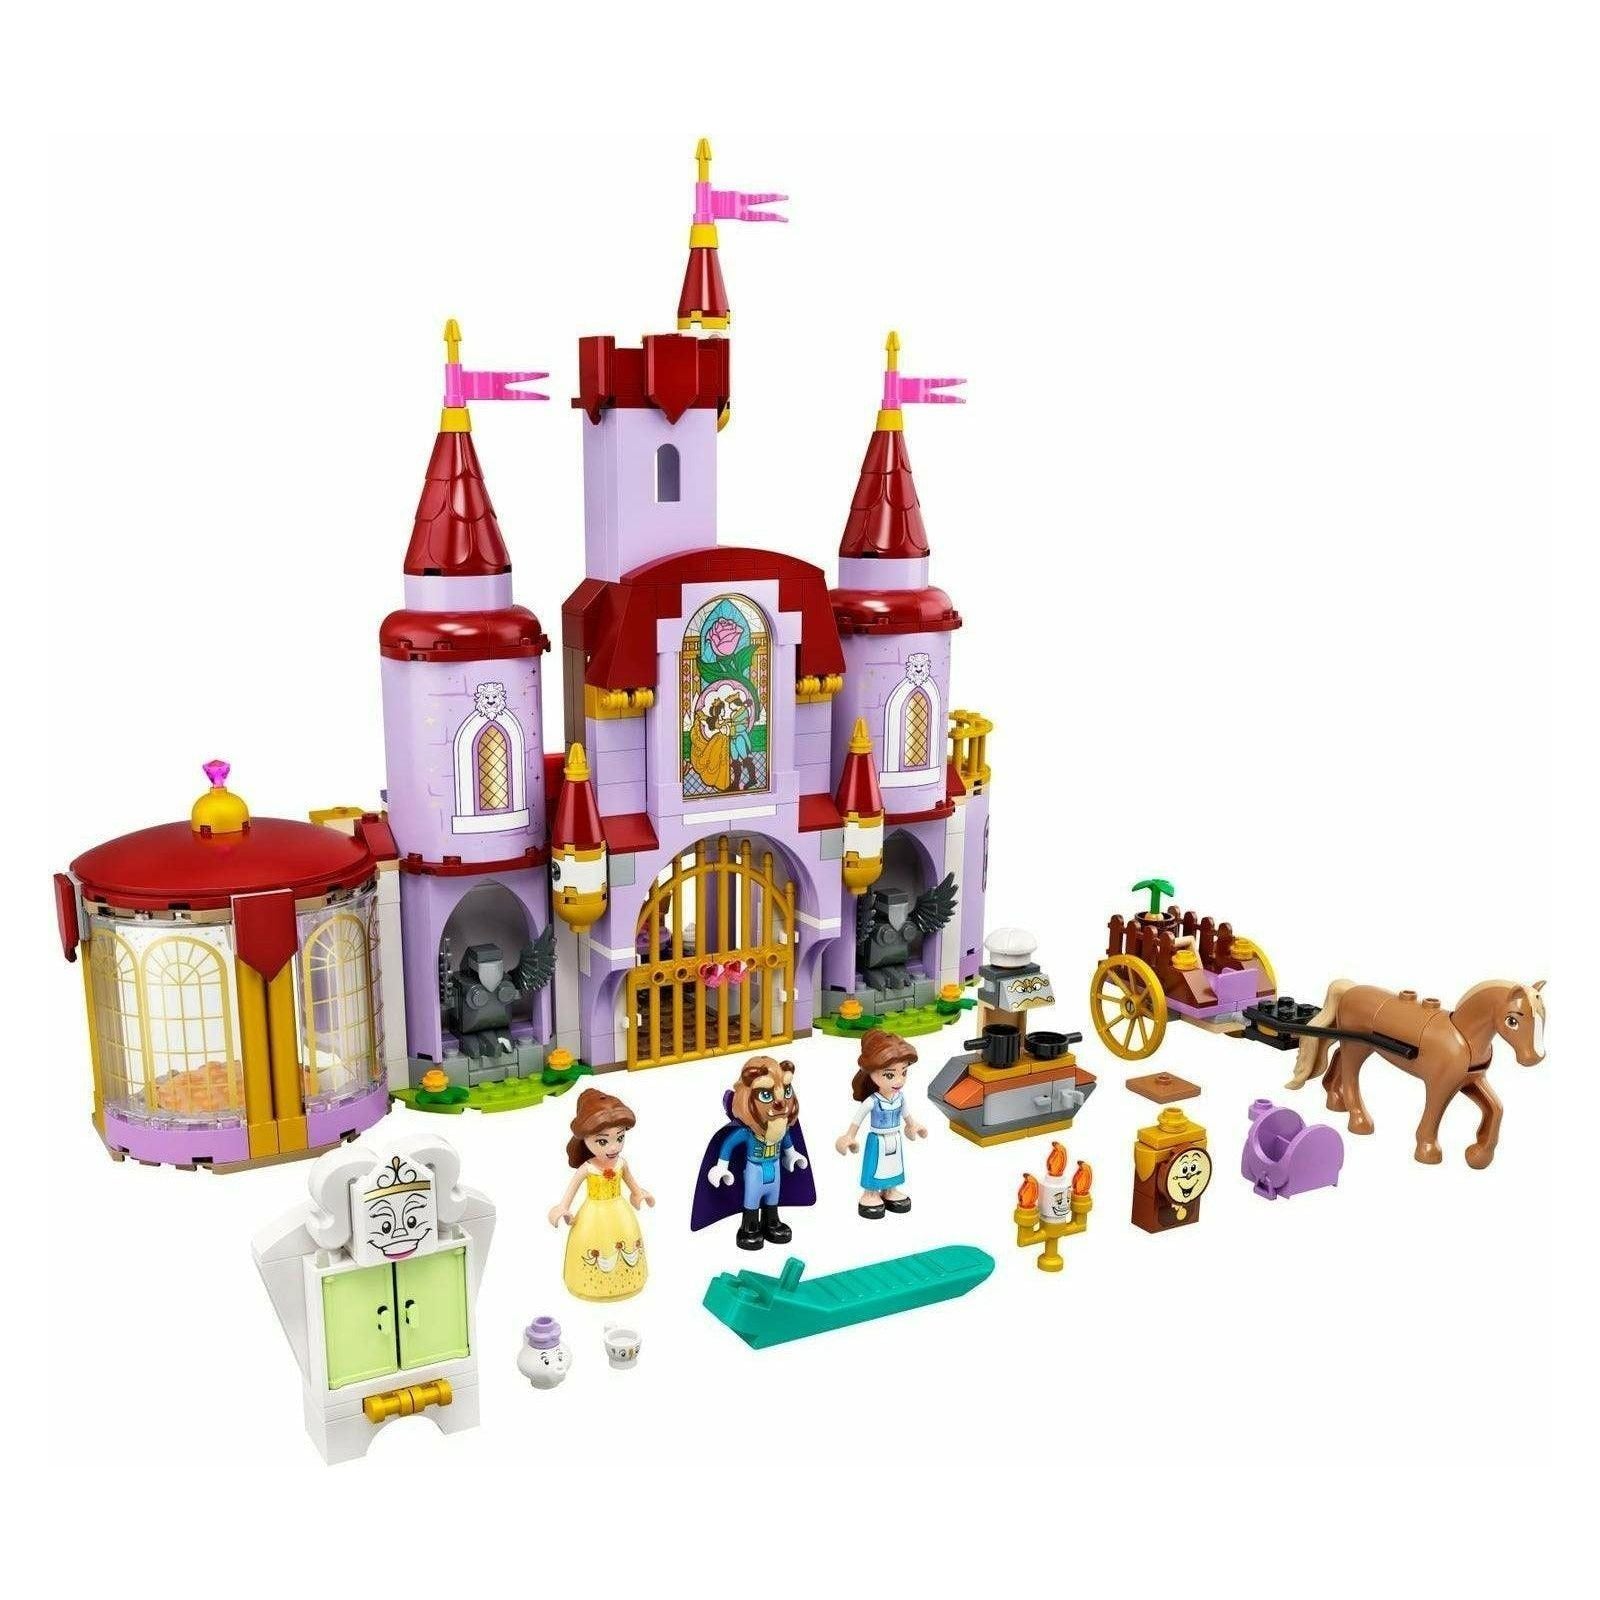 LEGO 43196 Belle & The Beast’s Castle Kit An Iconic Castle Construction 505 Pieces - BumbleToys - 6+ Years, Girls, LEGO, OXE, Pre-Order